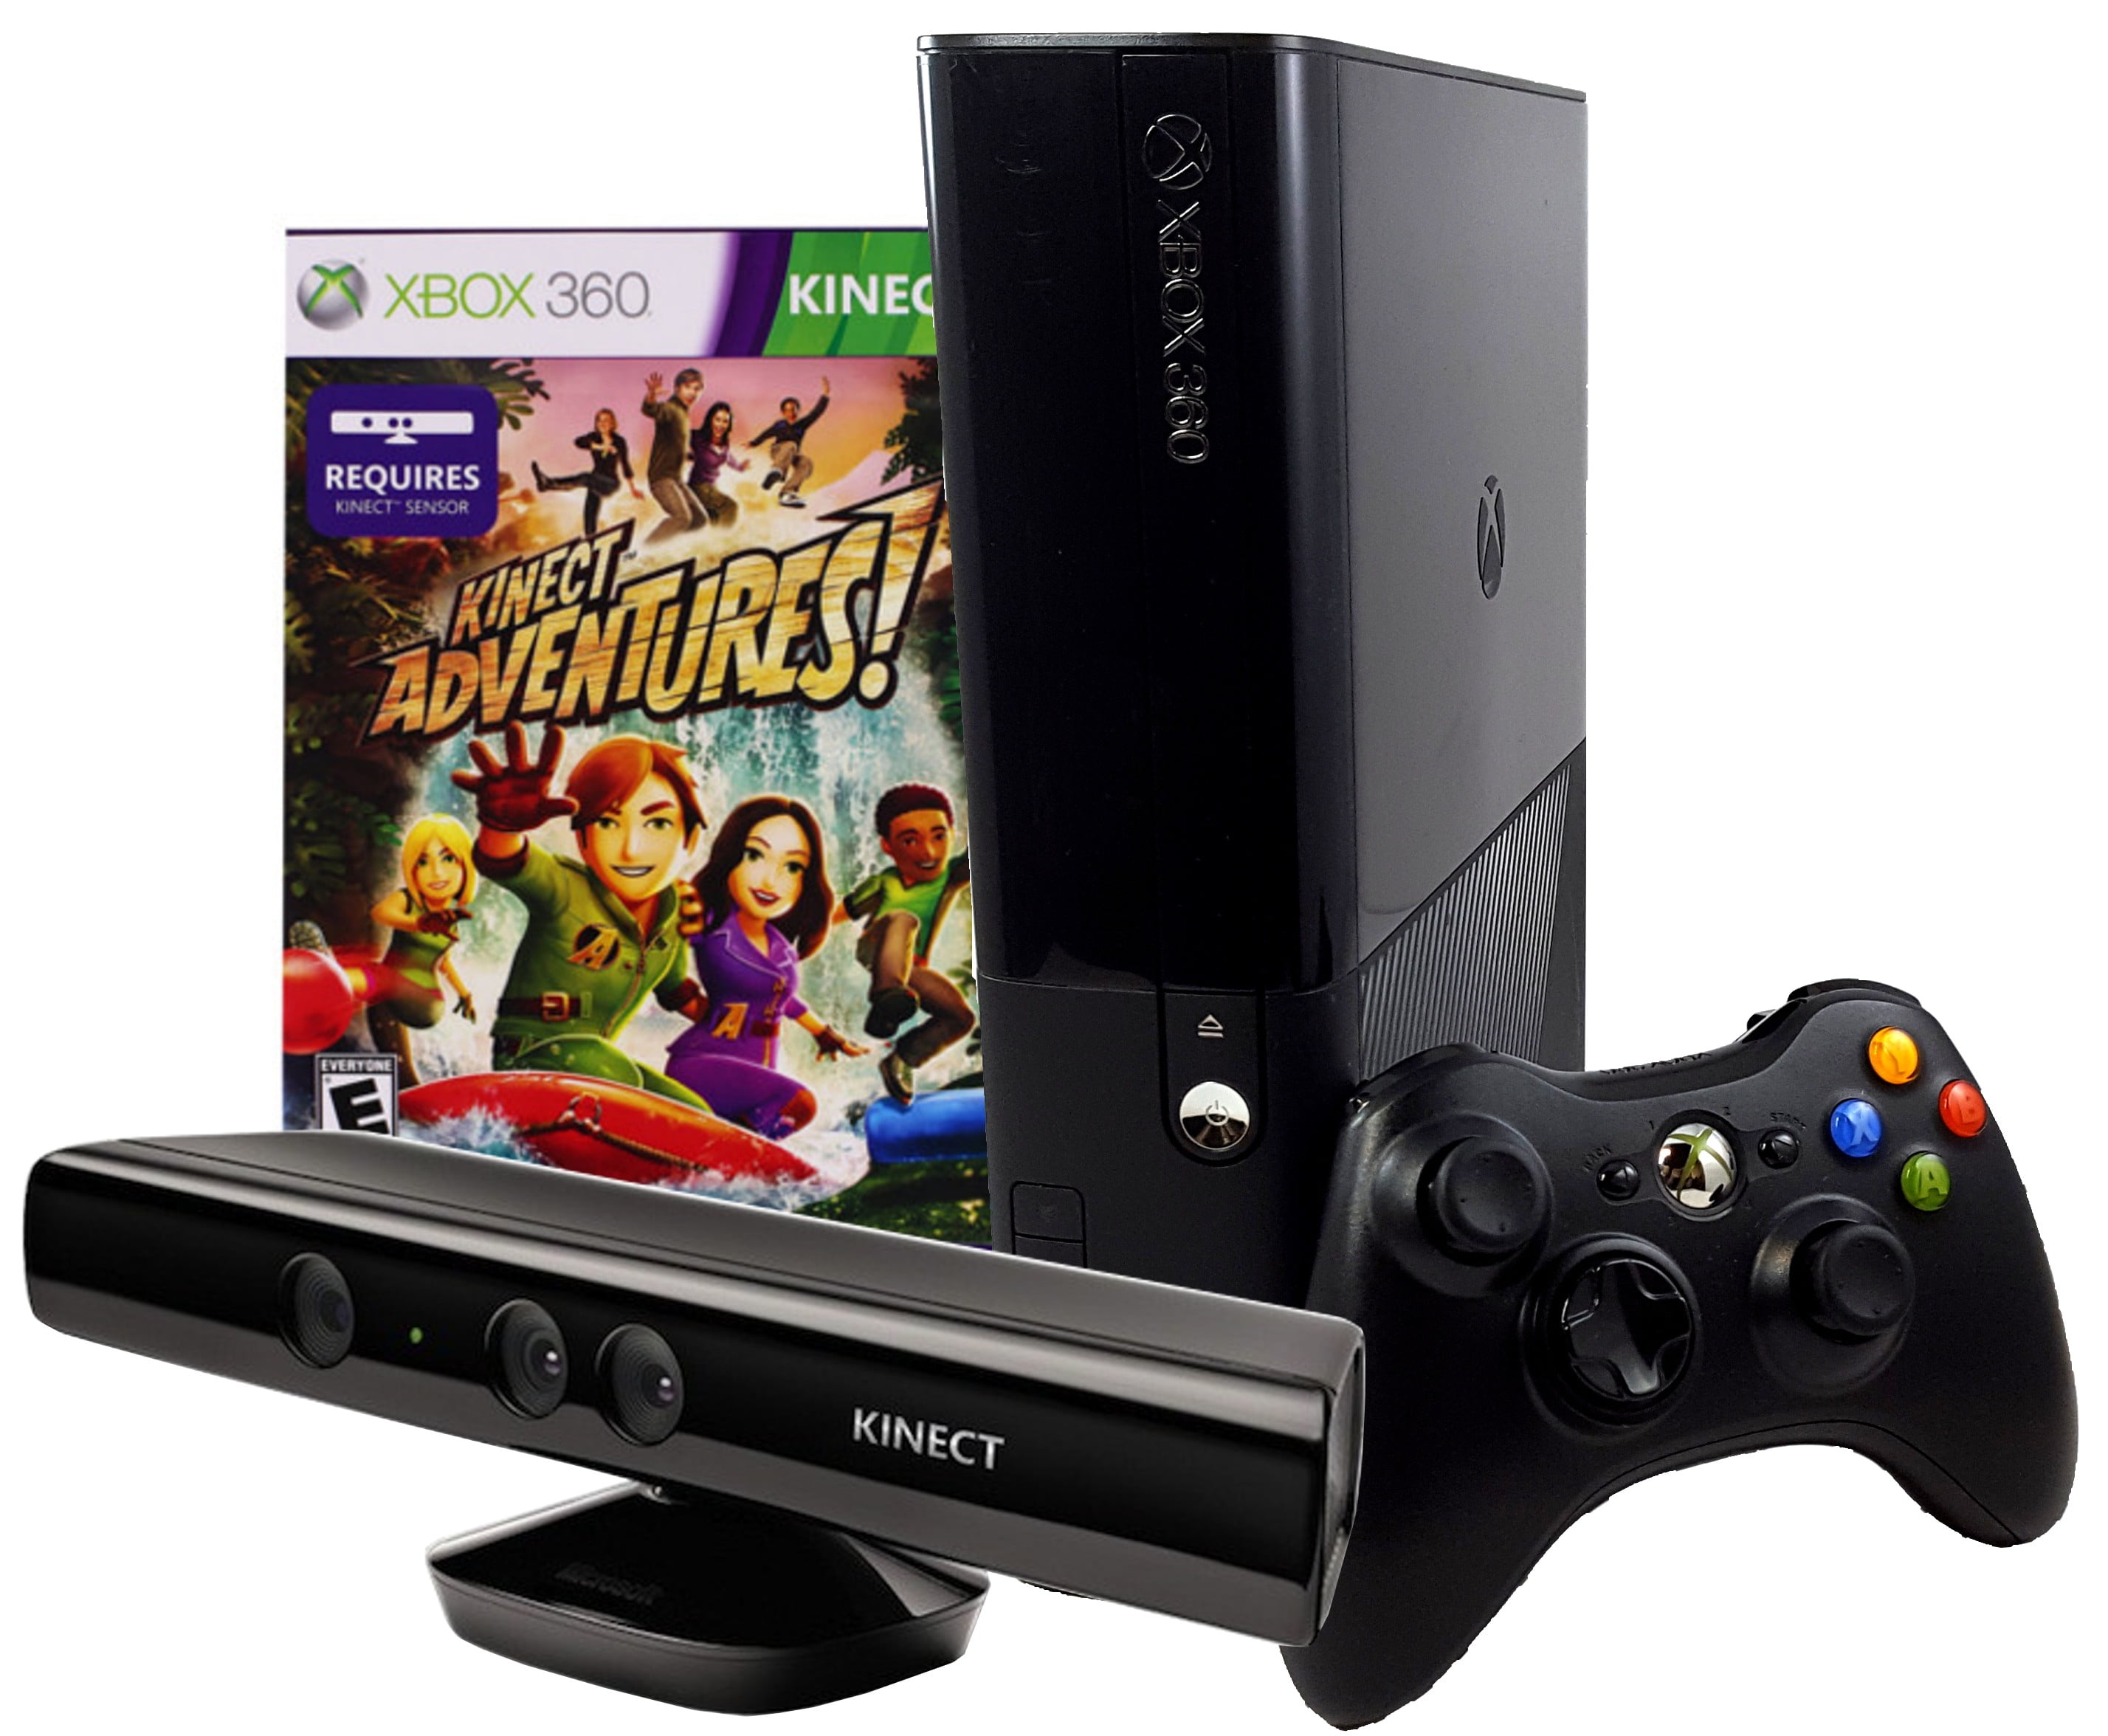 Vet Ouderling Wijzerplaat Restored Microsoft Xbox 360 E Slim 4GB Console with Kinect Sensor and  Kinect Adventures (Refurbished) - Walmart.com